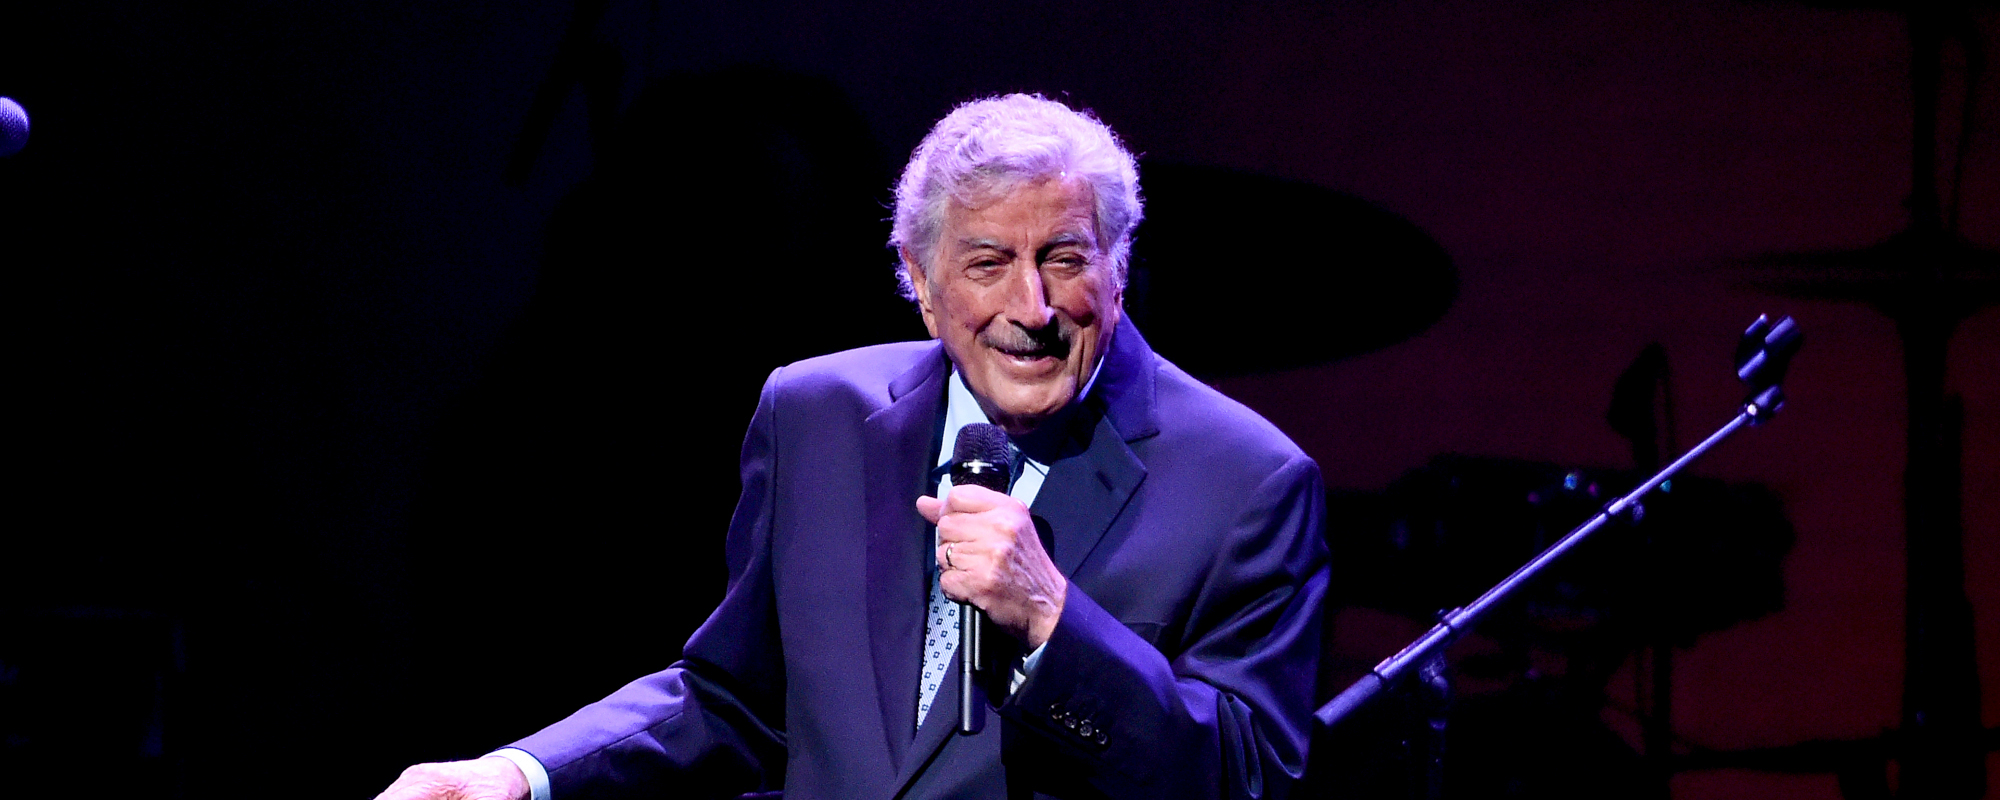 The 21 Best Tony Bennett Quotes - American Songwriter